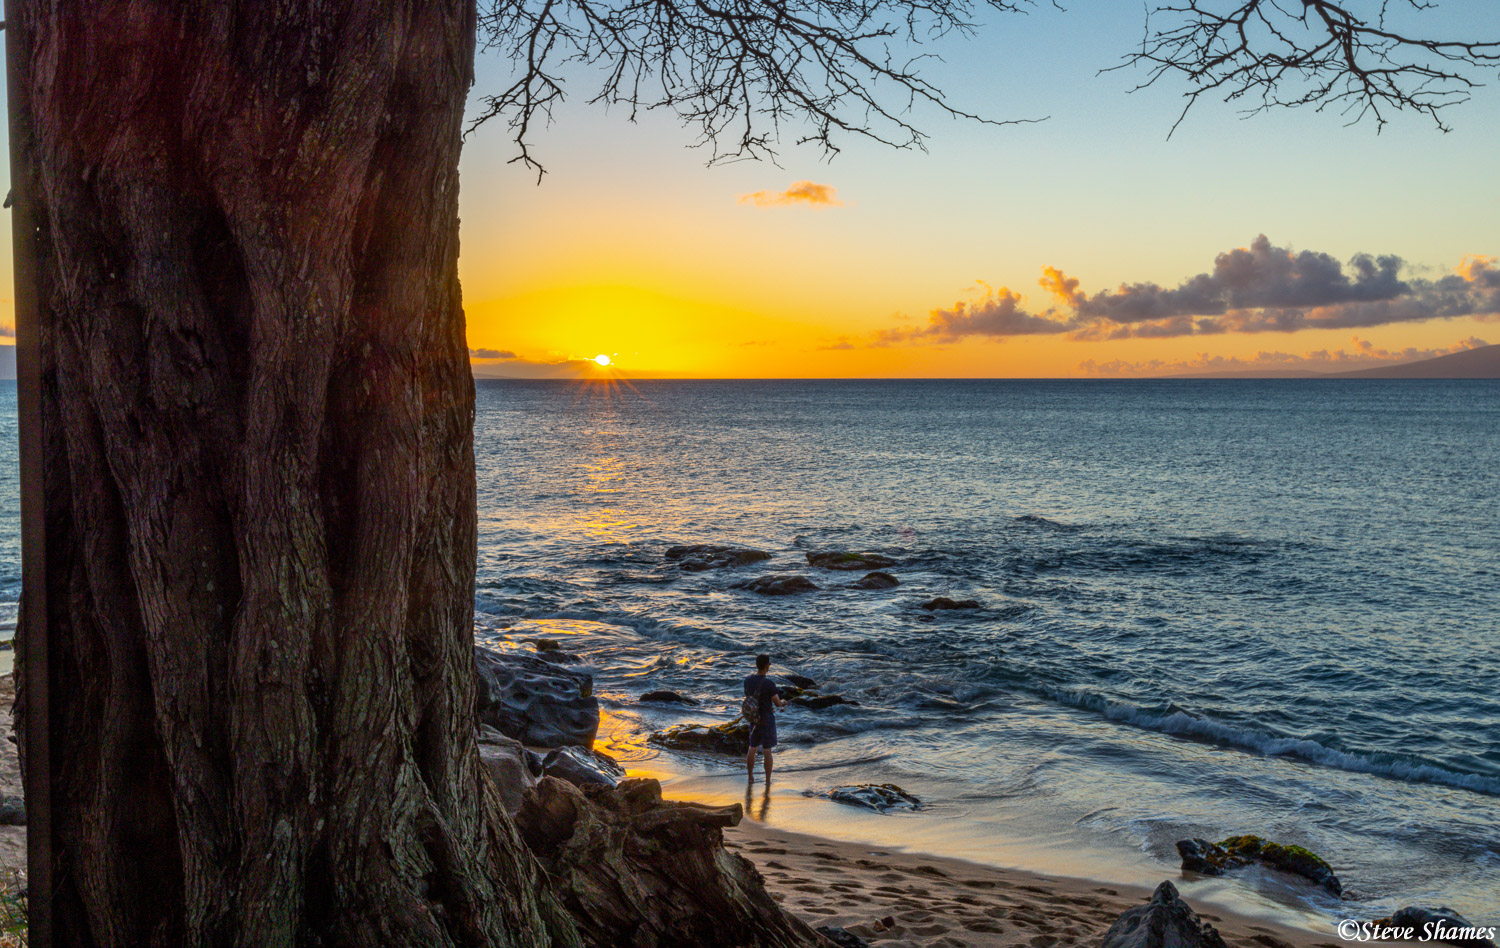 This guy fishing kind of added a little context into this sunset scene at Pohaku Park in west Maui.